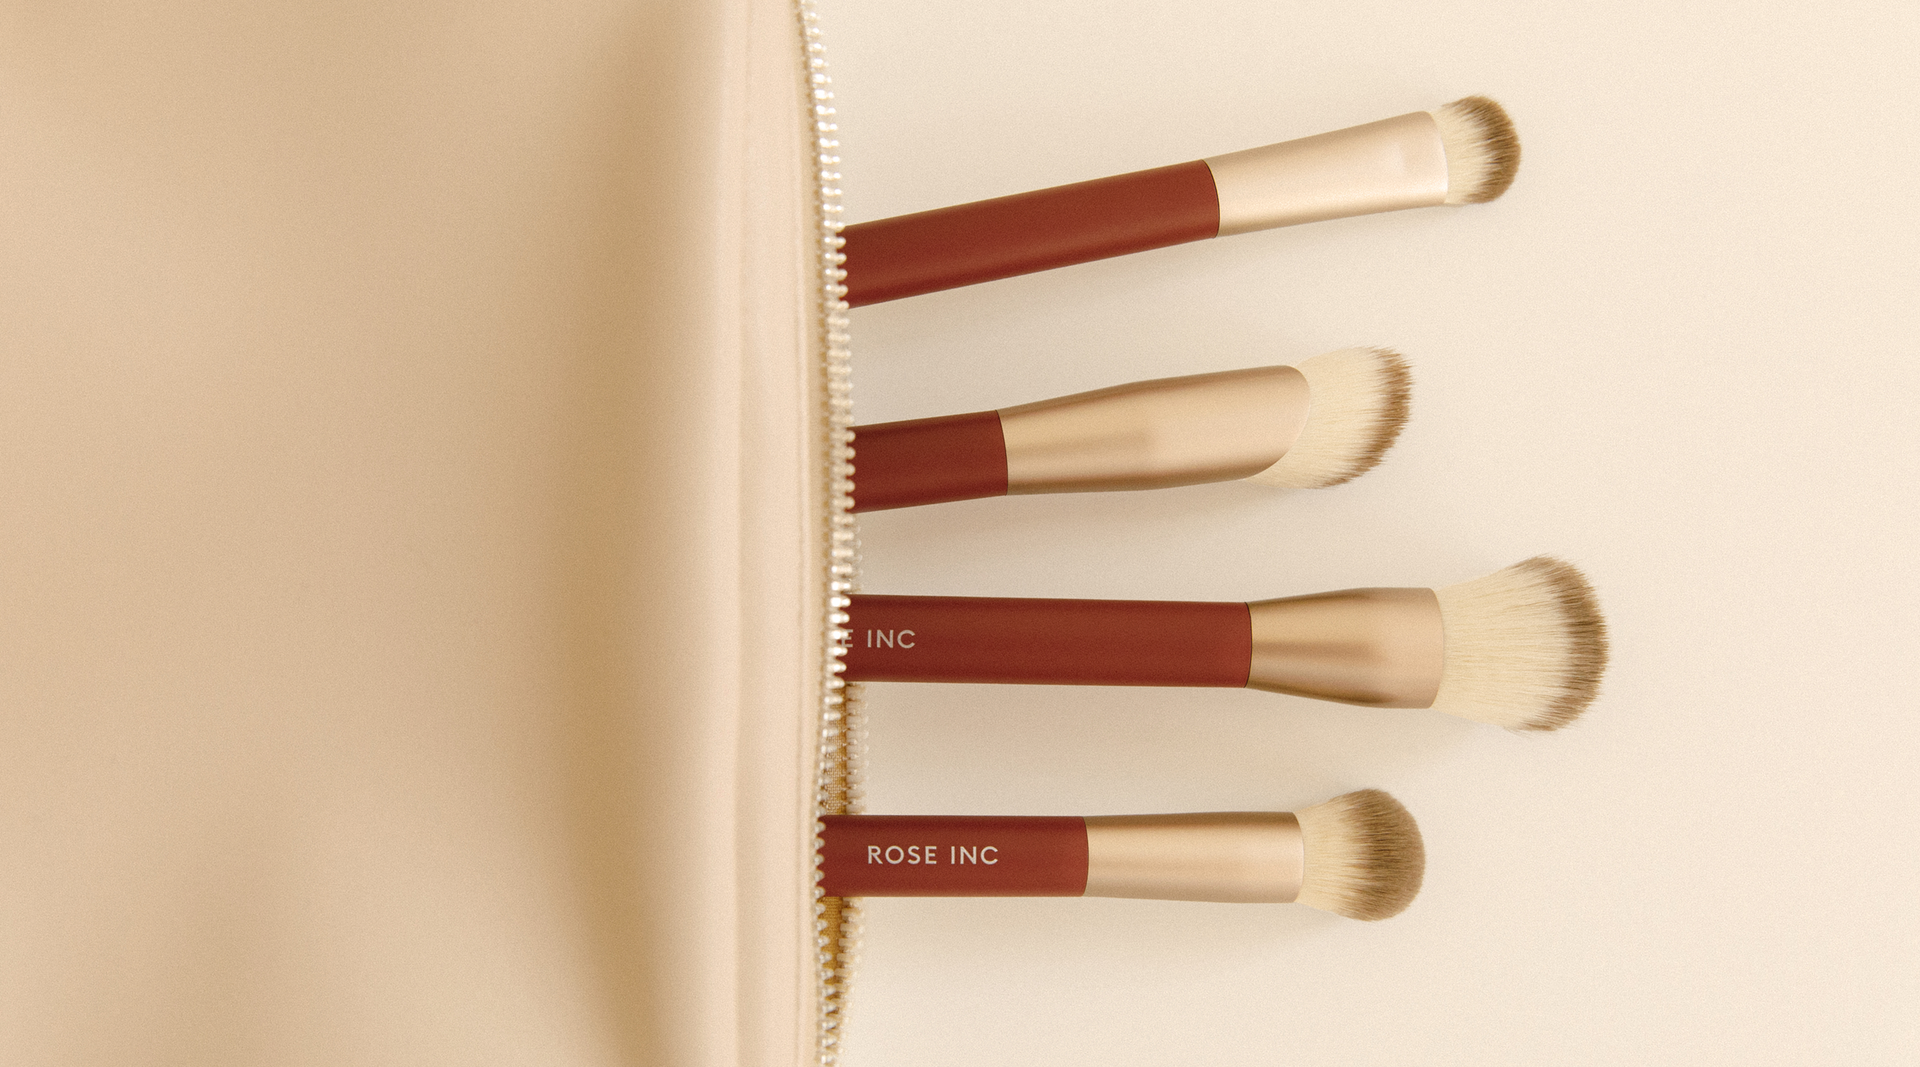 How to Clean Sanitize Makeup Brushes Like a Pro